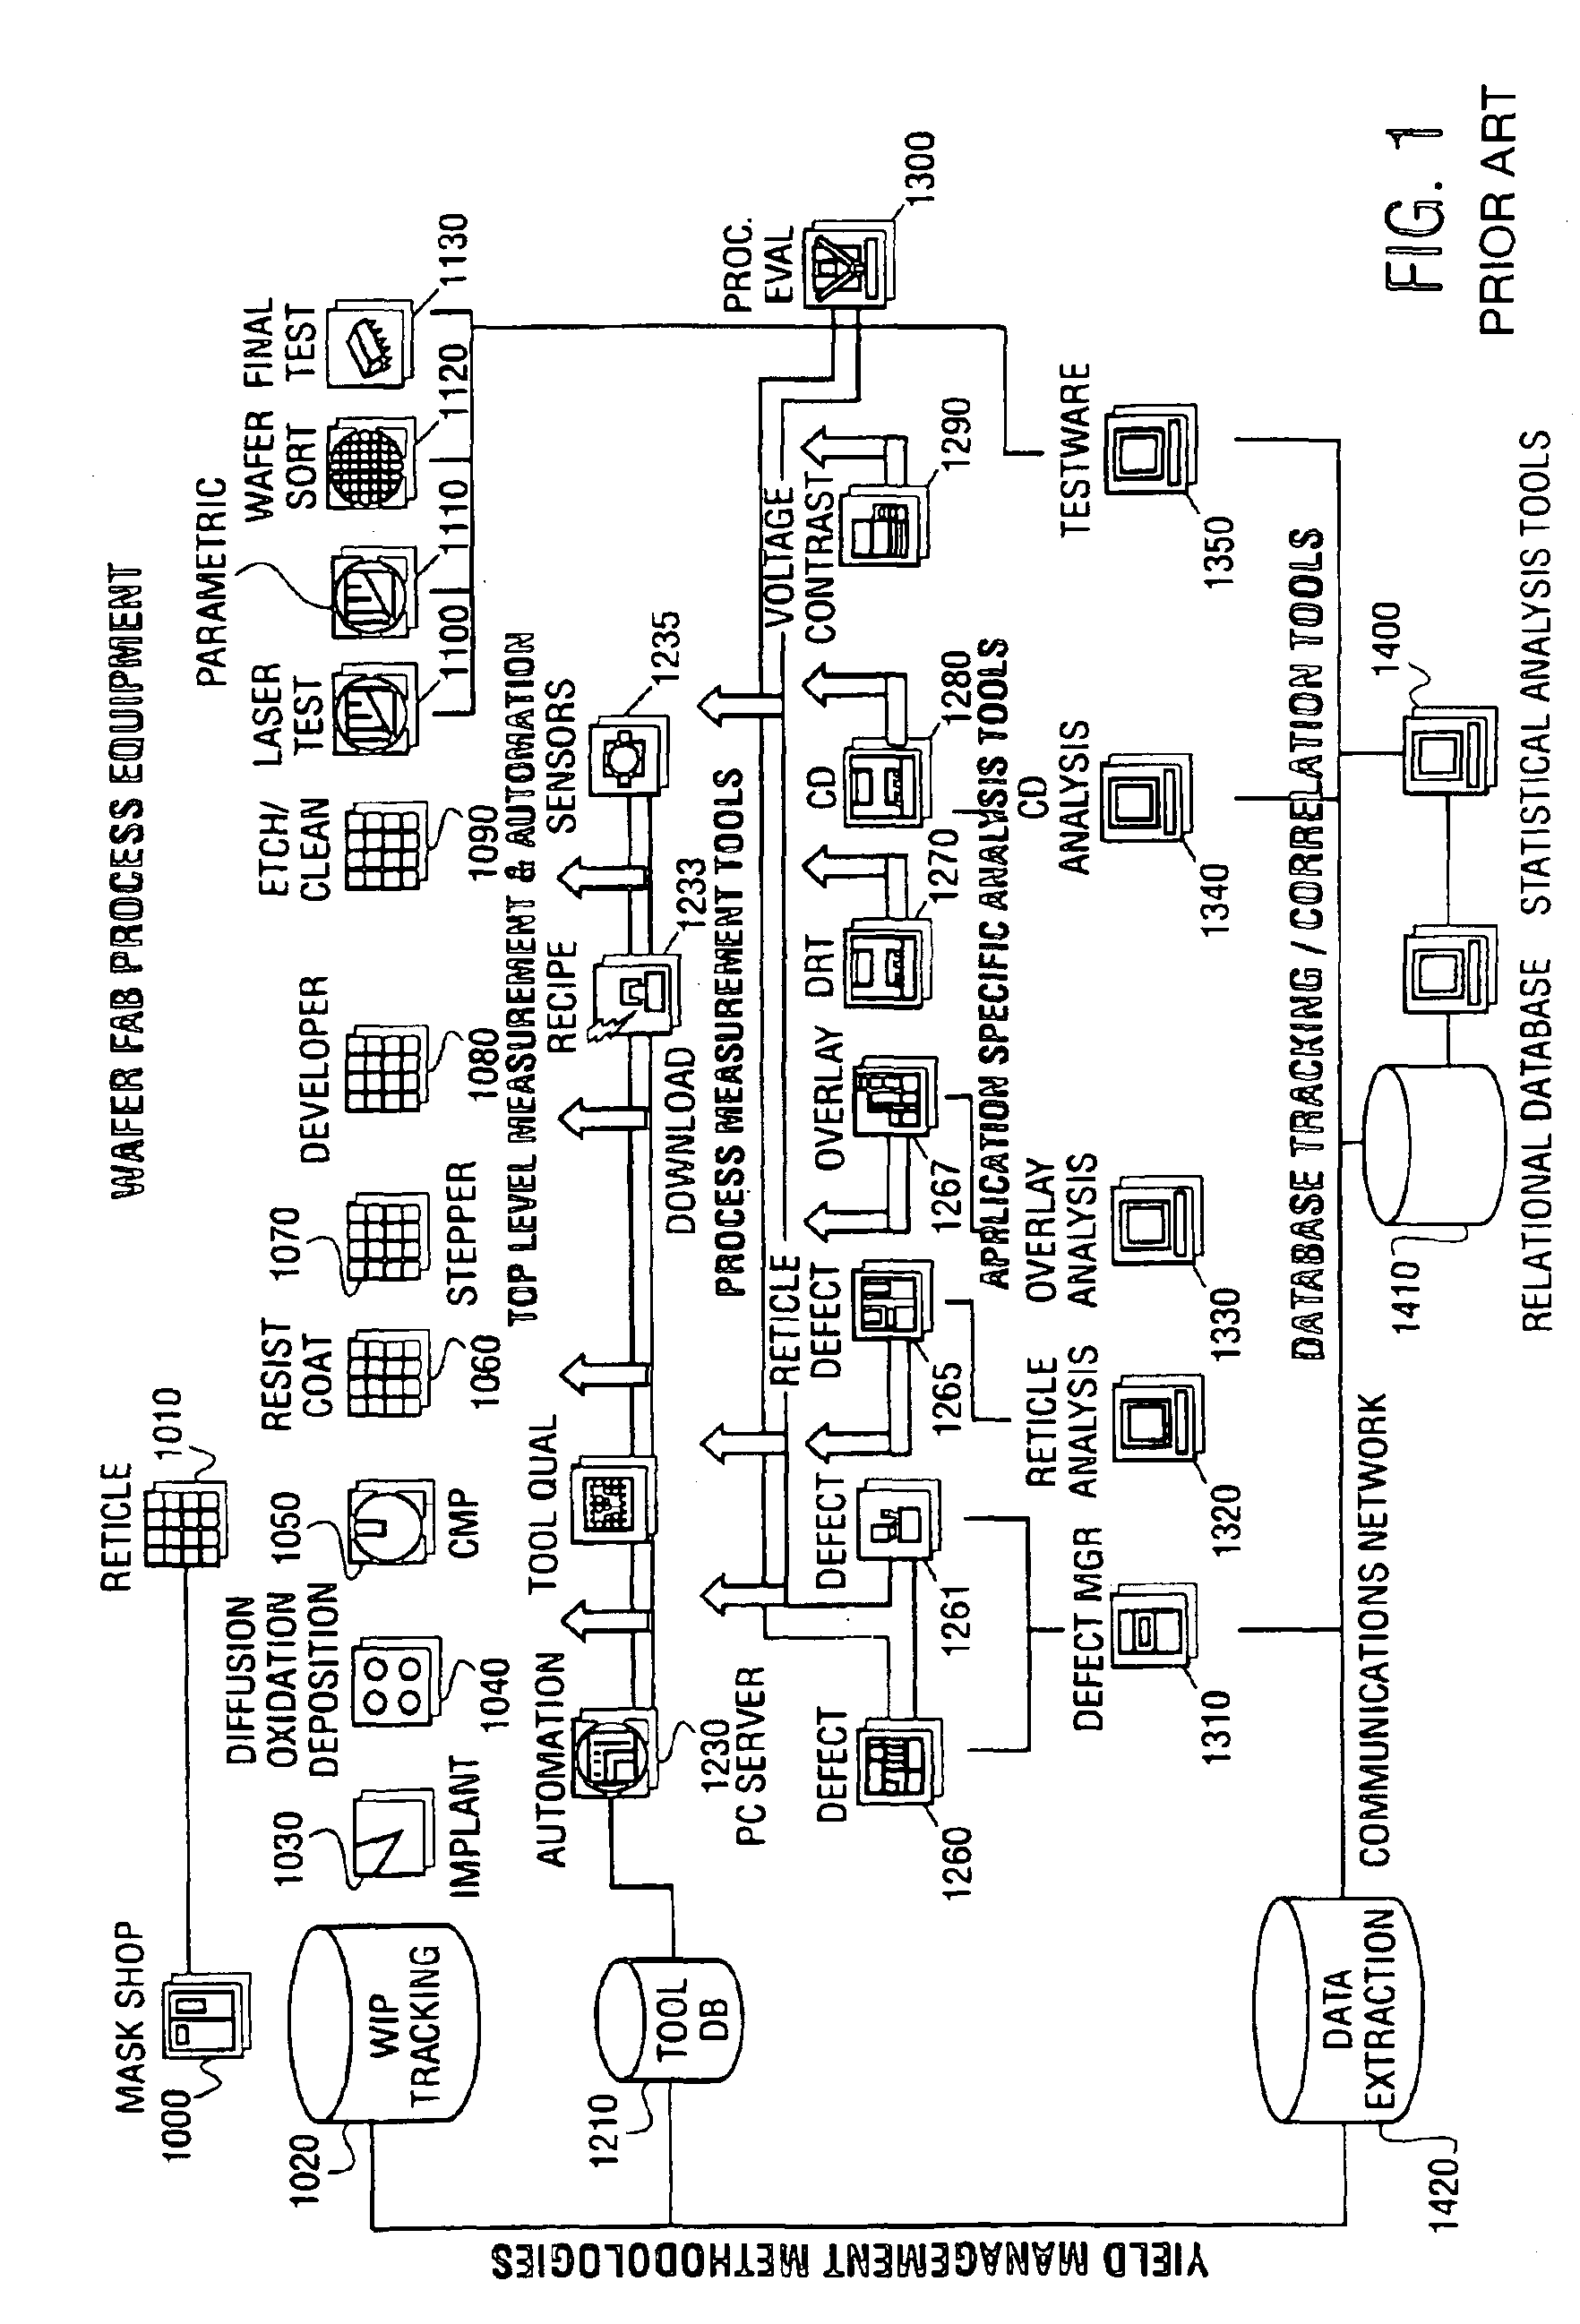 Method and apparatus for analyzing manufacturing data